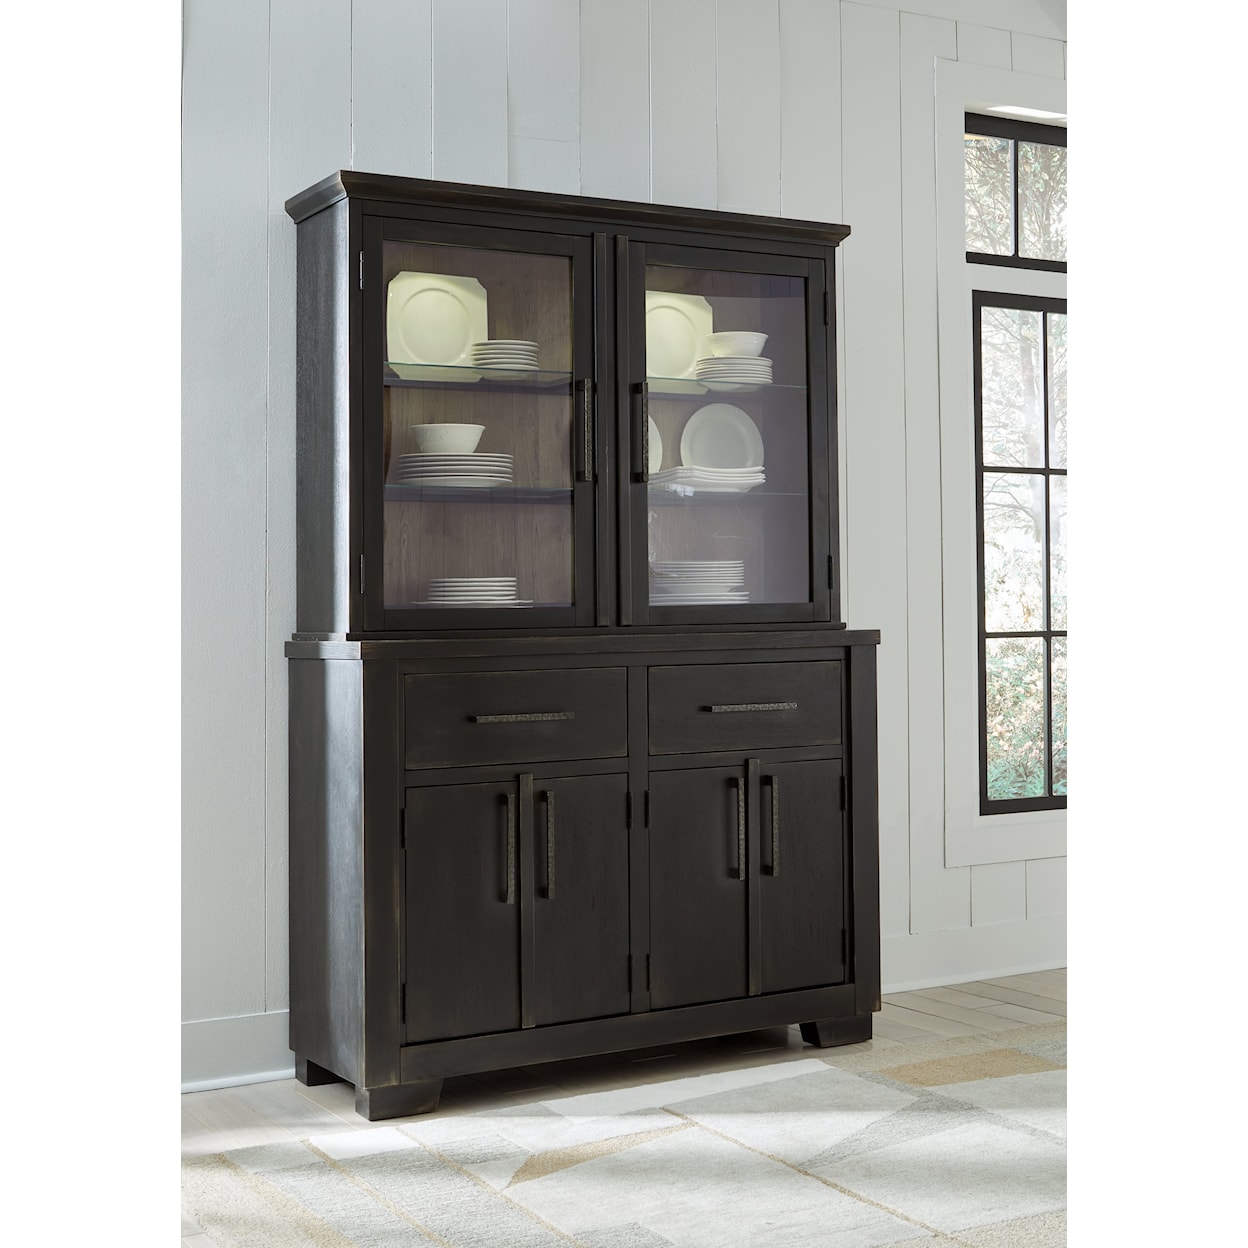 Benchcraft Galliden Dining Buffet and Hutch